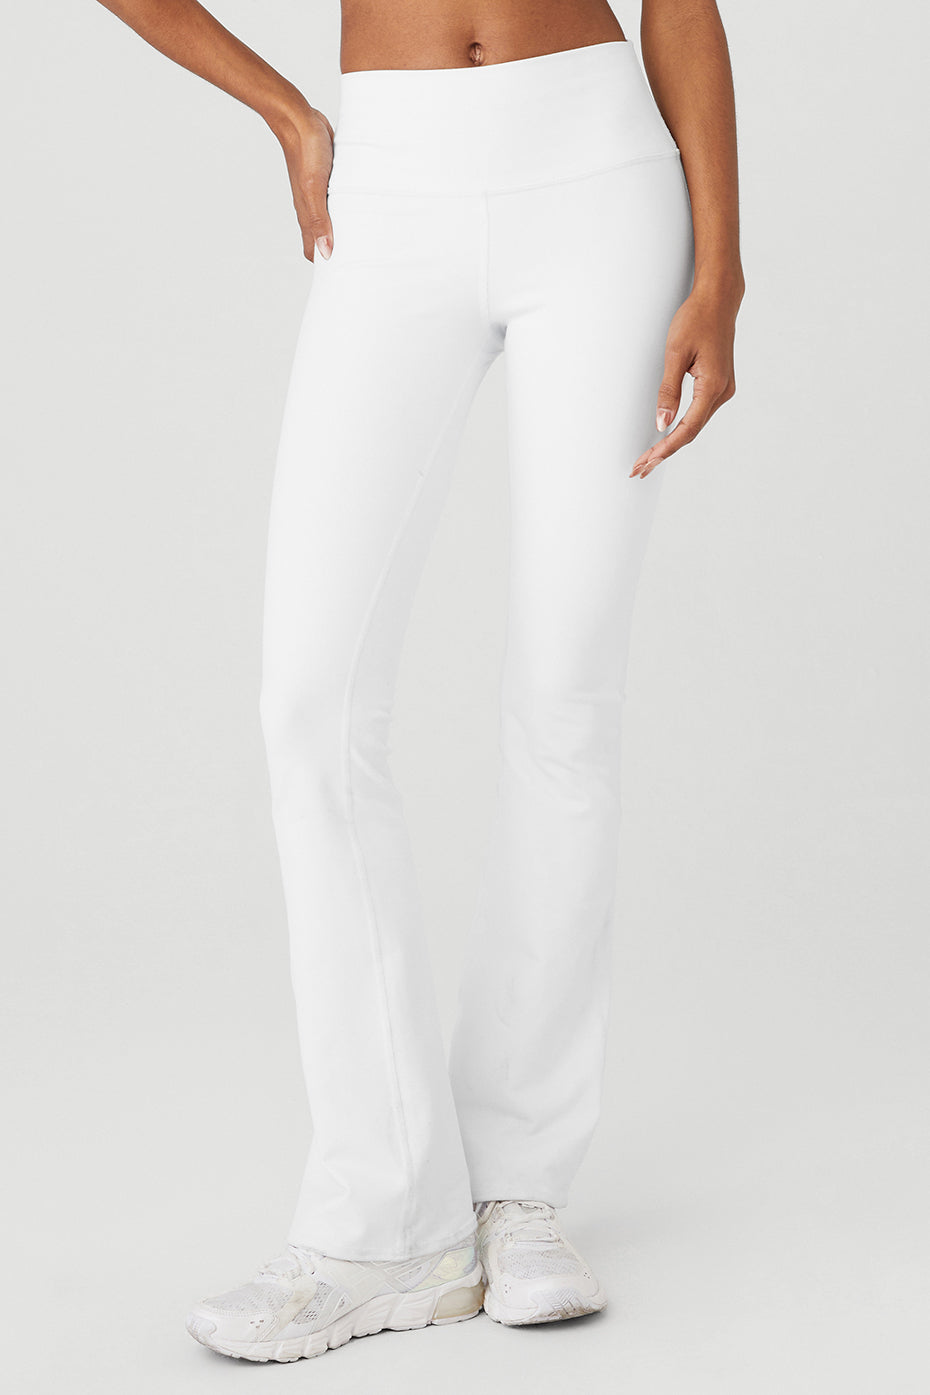 White Yoga Pants Style  International Society of Precision Agriculture